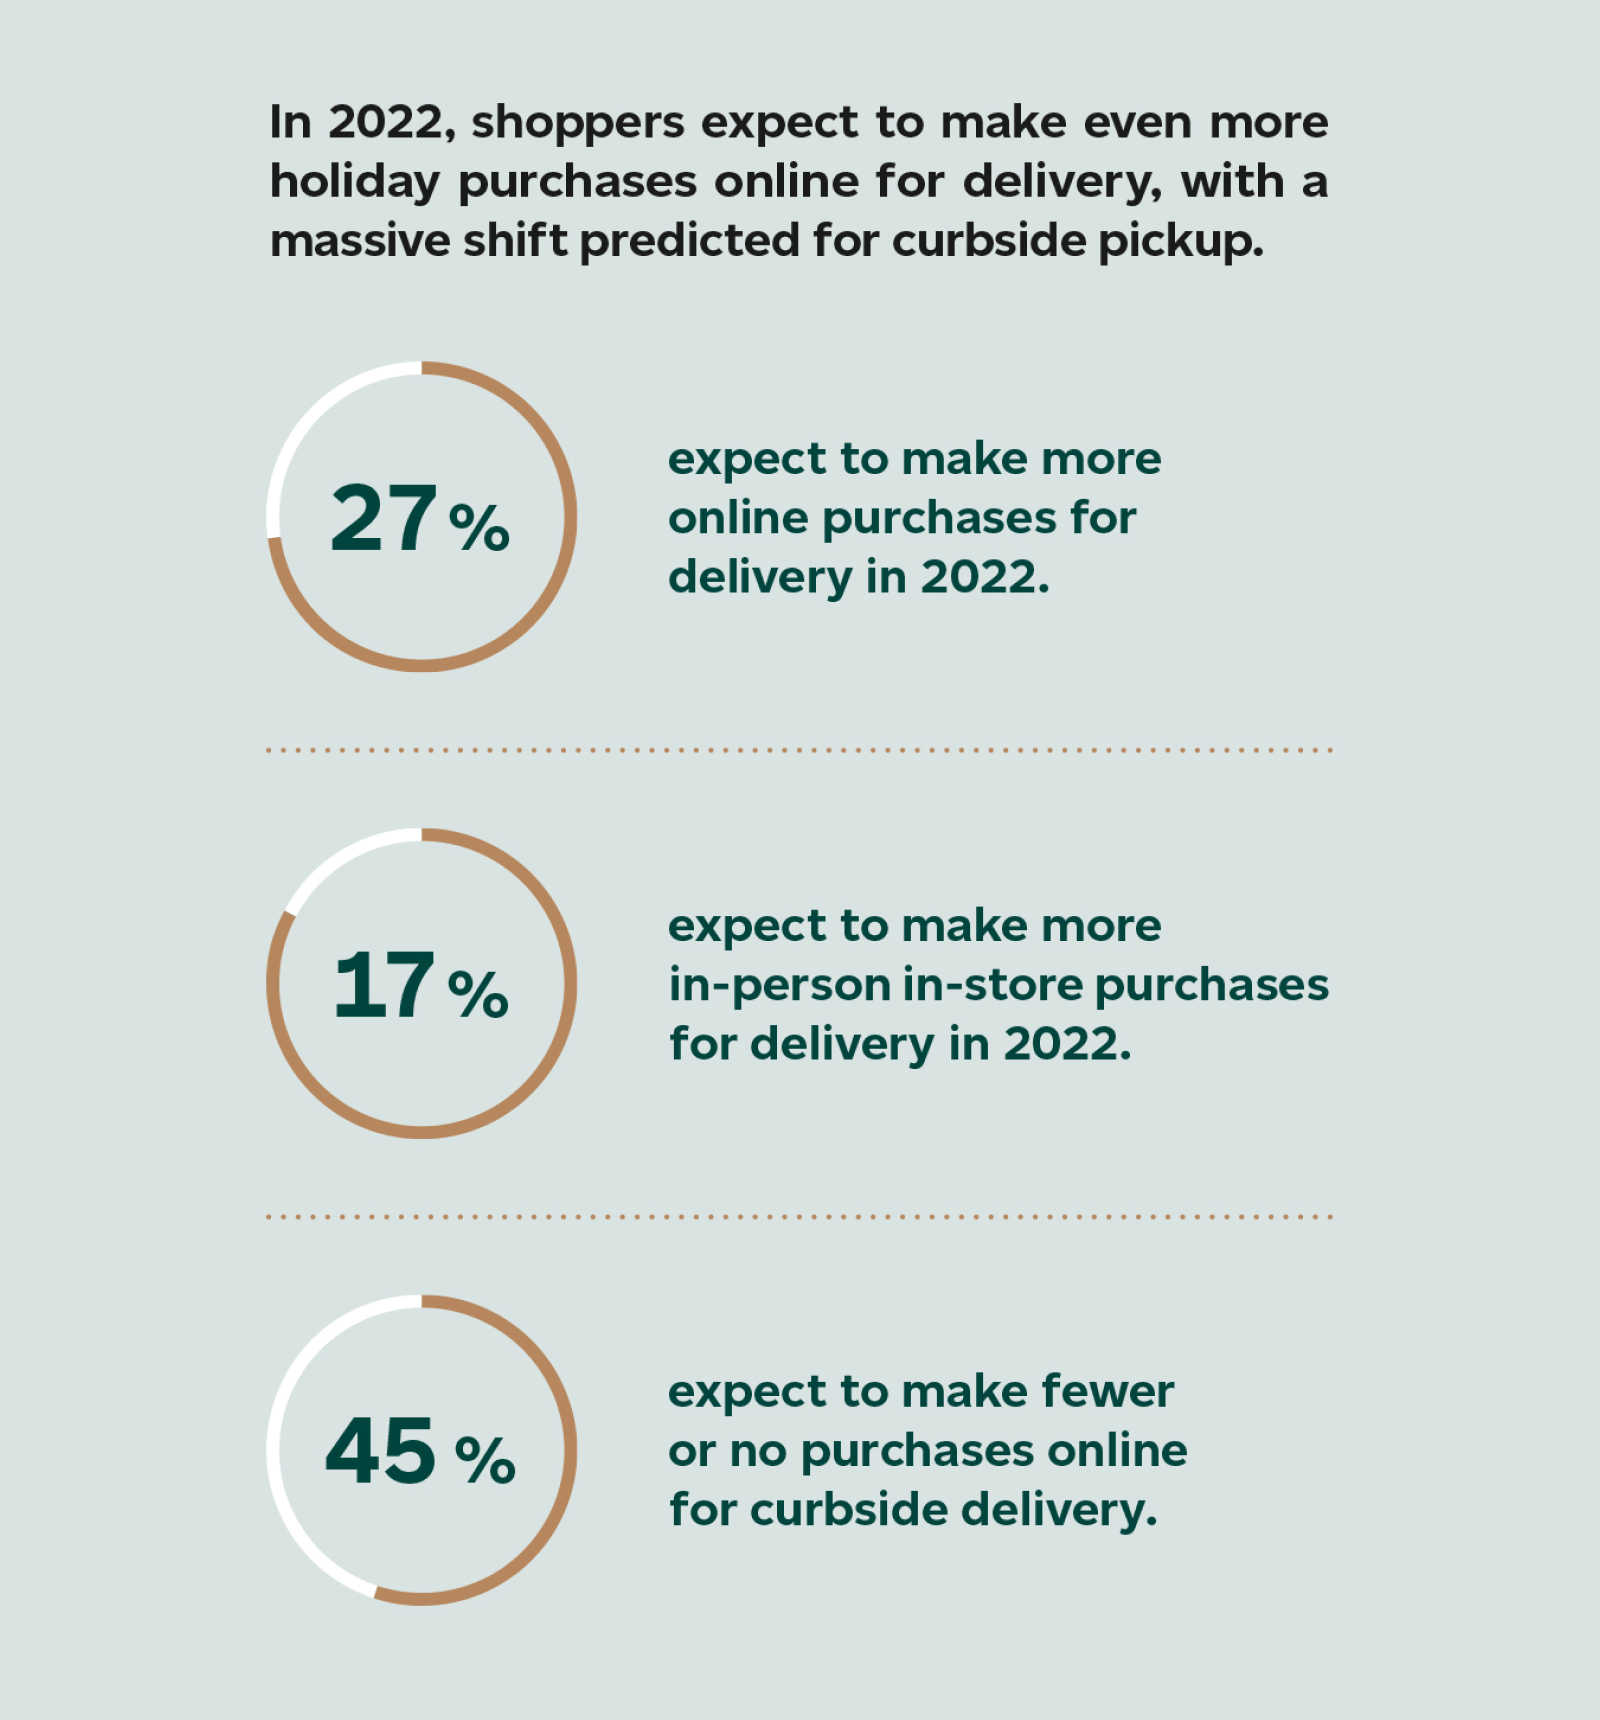 In 2022, shoppers expect to make even more holiday purchases online for delivery, with a massive shift predicted for curbside pickup. 27% expect to make more online purchases for delivery in 2022, 17 % expect to make more in-person in-store purchases for delivery, 45% expect to make fewer or no purchases online for curbside delivery.